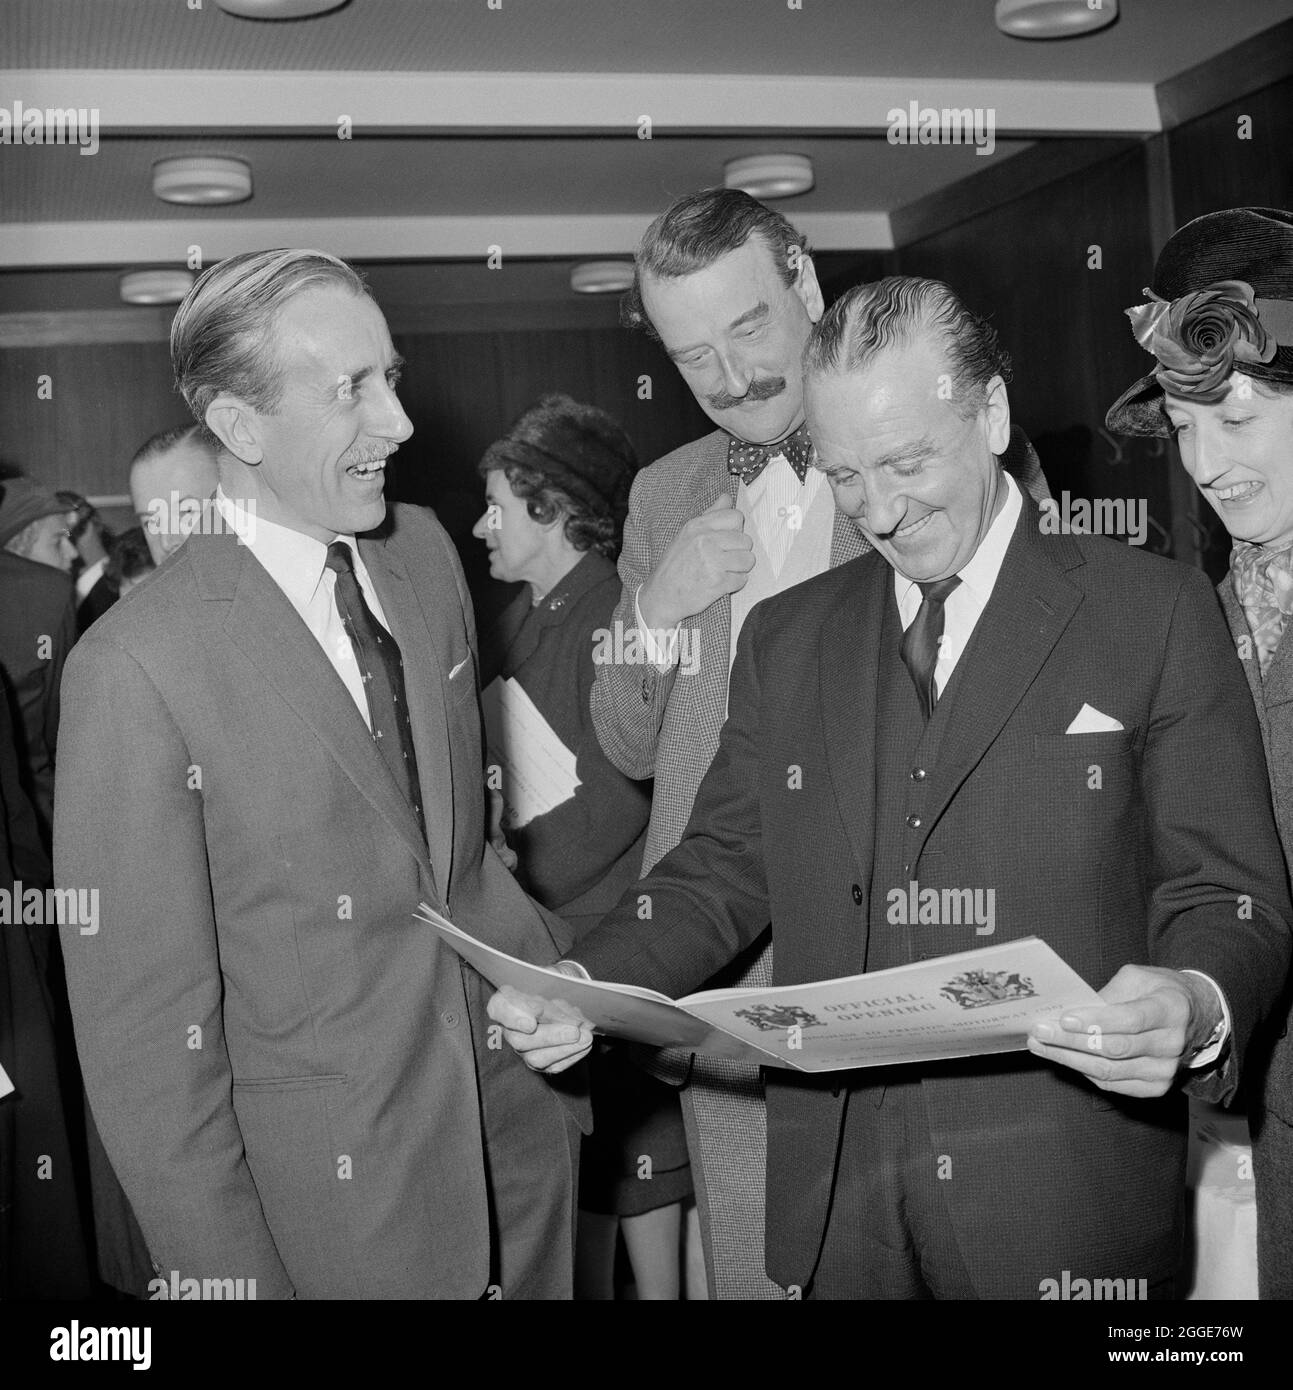 William Kirby Laing with the Rt. Hon. Ernest Marples, Minister of Transport, at the opening ceremony of a stretch of the M6 motorway through North Staffordshire and Cheshire held at Knutsford. This photograph is from a batch which is recorded in the negative register as having been taken at Knutsford. However, in December 1963 in the Laing monthly newsletter 'Team Spirit', the photograph appears with an article recording that a short ceremony occurred at Keele Service area where a film was presented to the Chairman of Staffordshire County Council. This preceded the official opening, just over Stock Photo